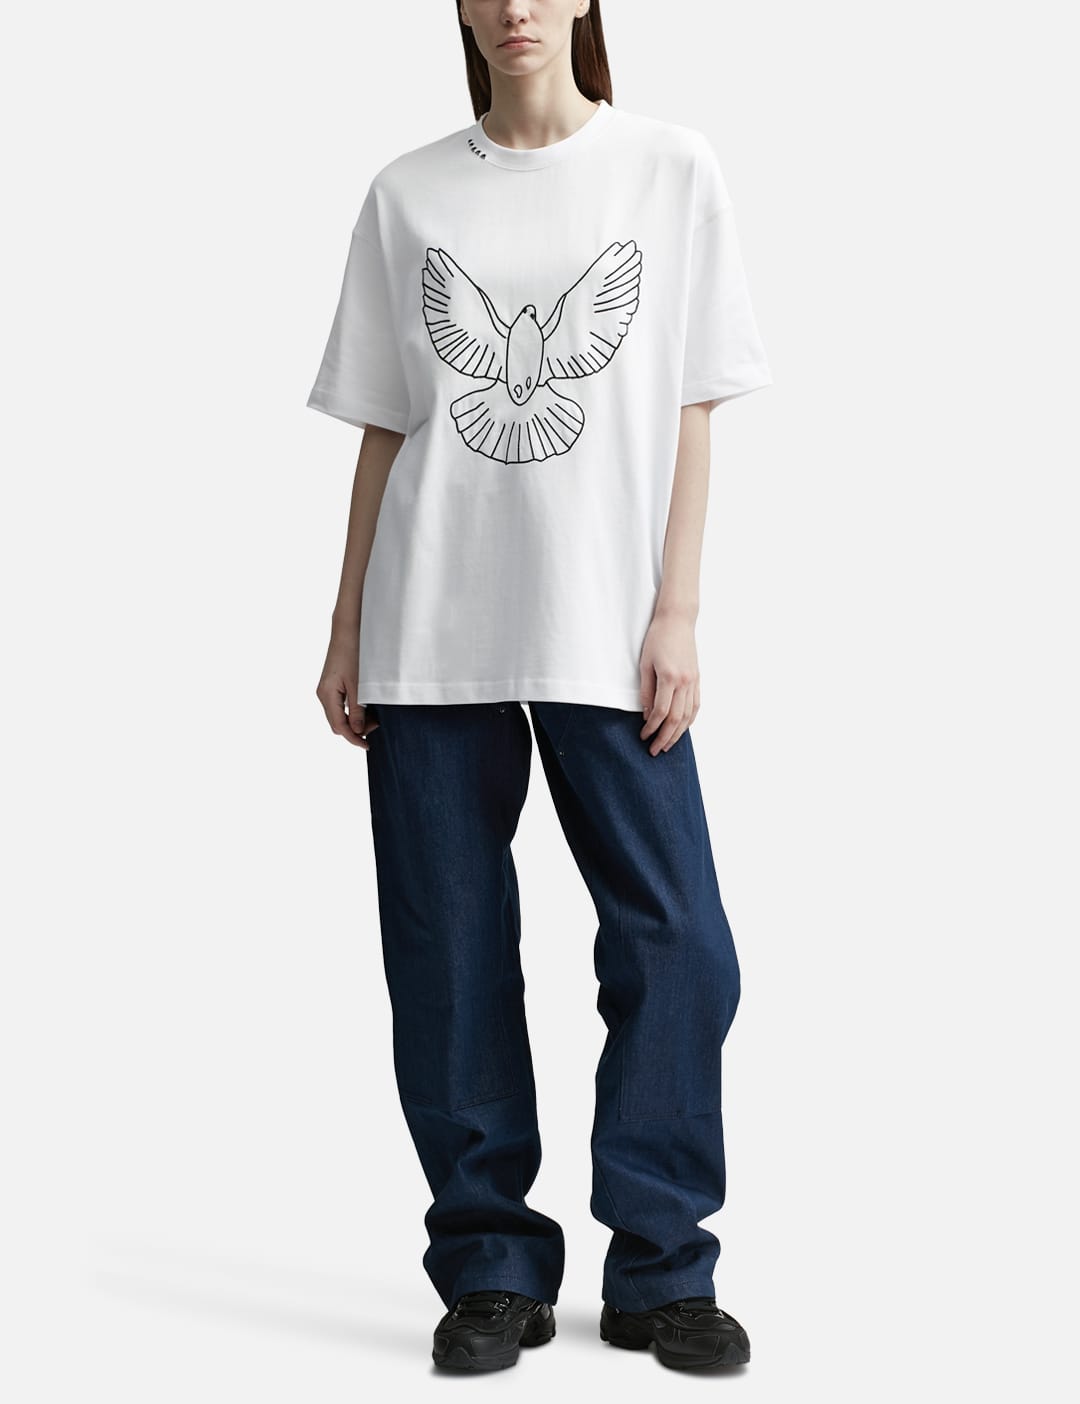 Human Made - One By Penfolds Rooster T-shirt | HBX - Globally